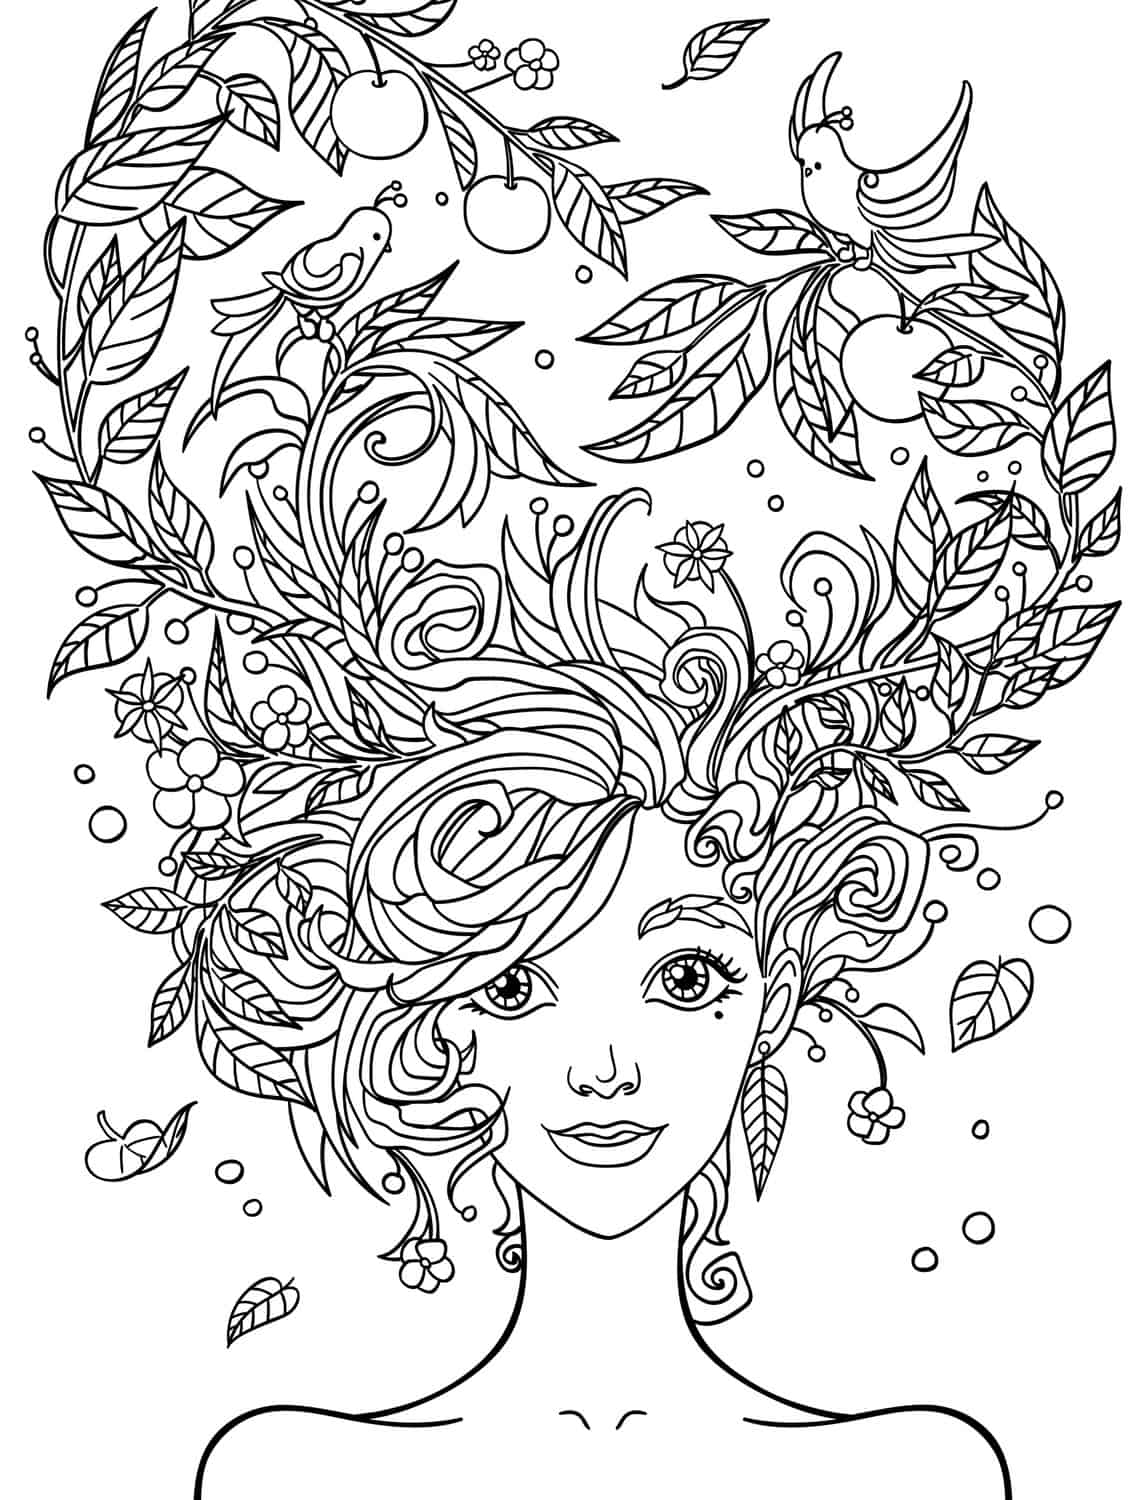 Crazy hair adult coloring pages